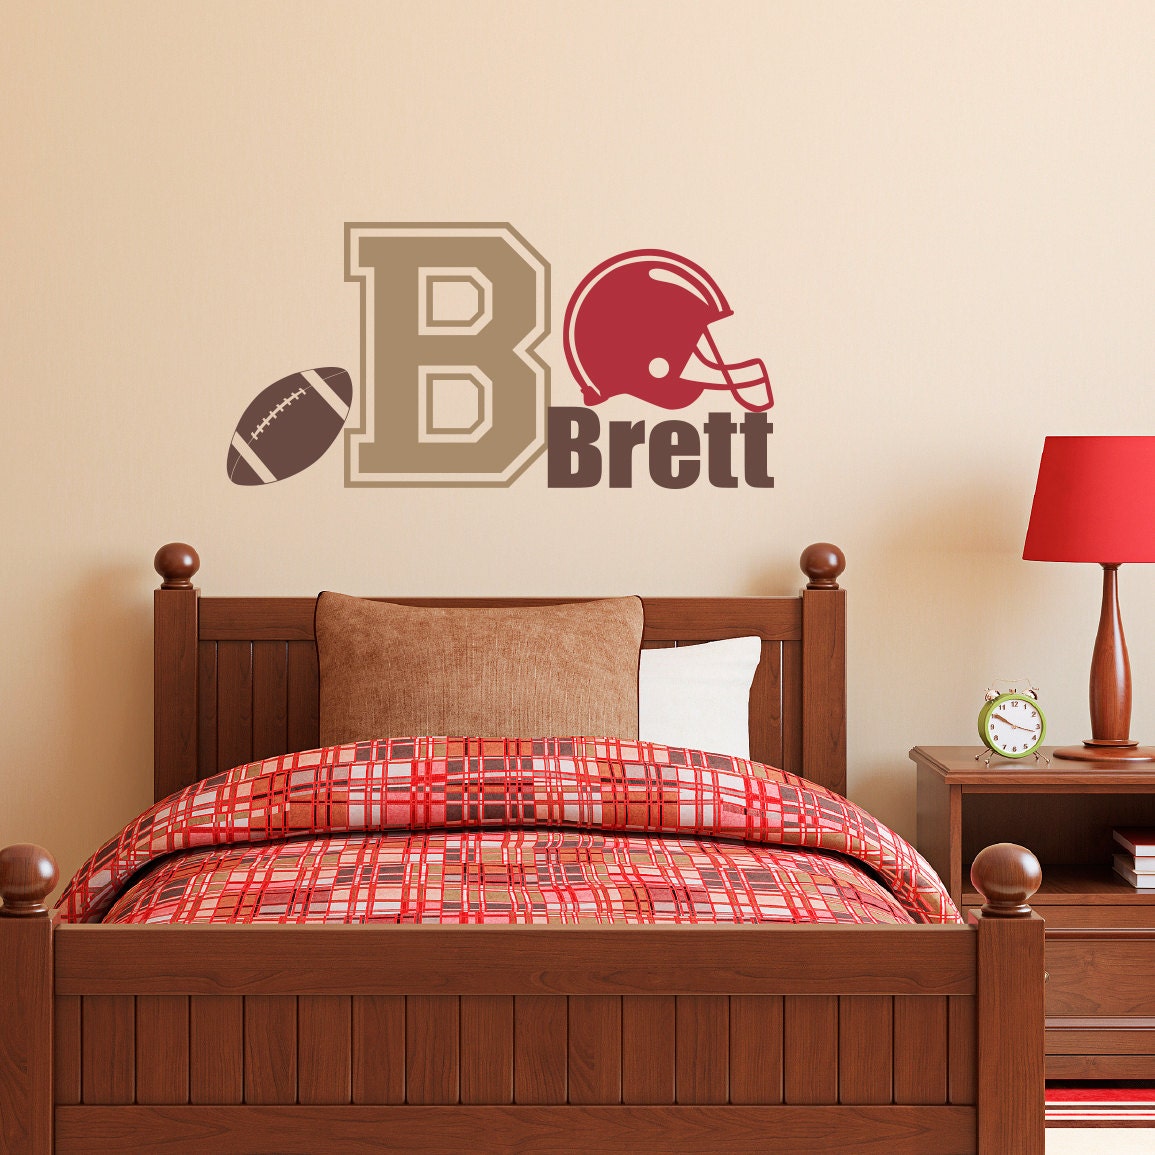 Football Wall Decal with Initial & Name - Sports Wall Decal - Boy Bedroom Wall Art - Medium